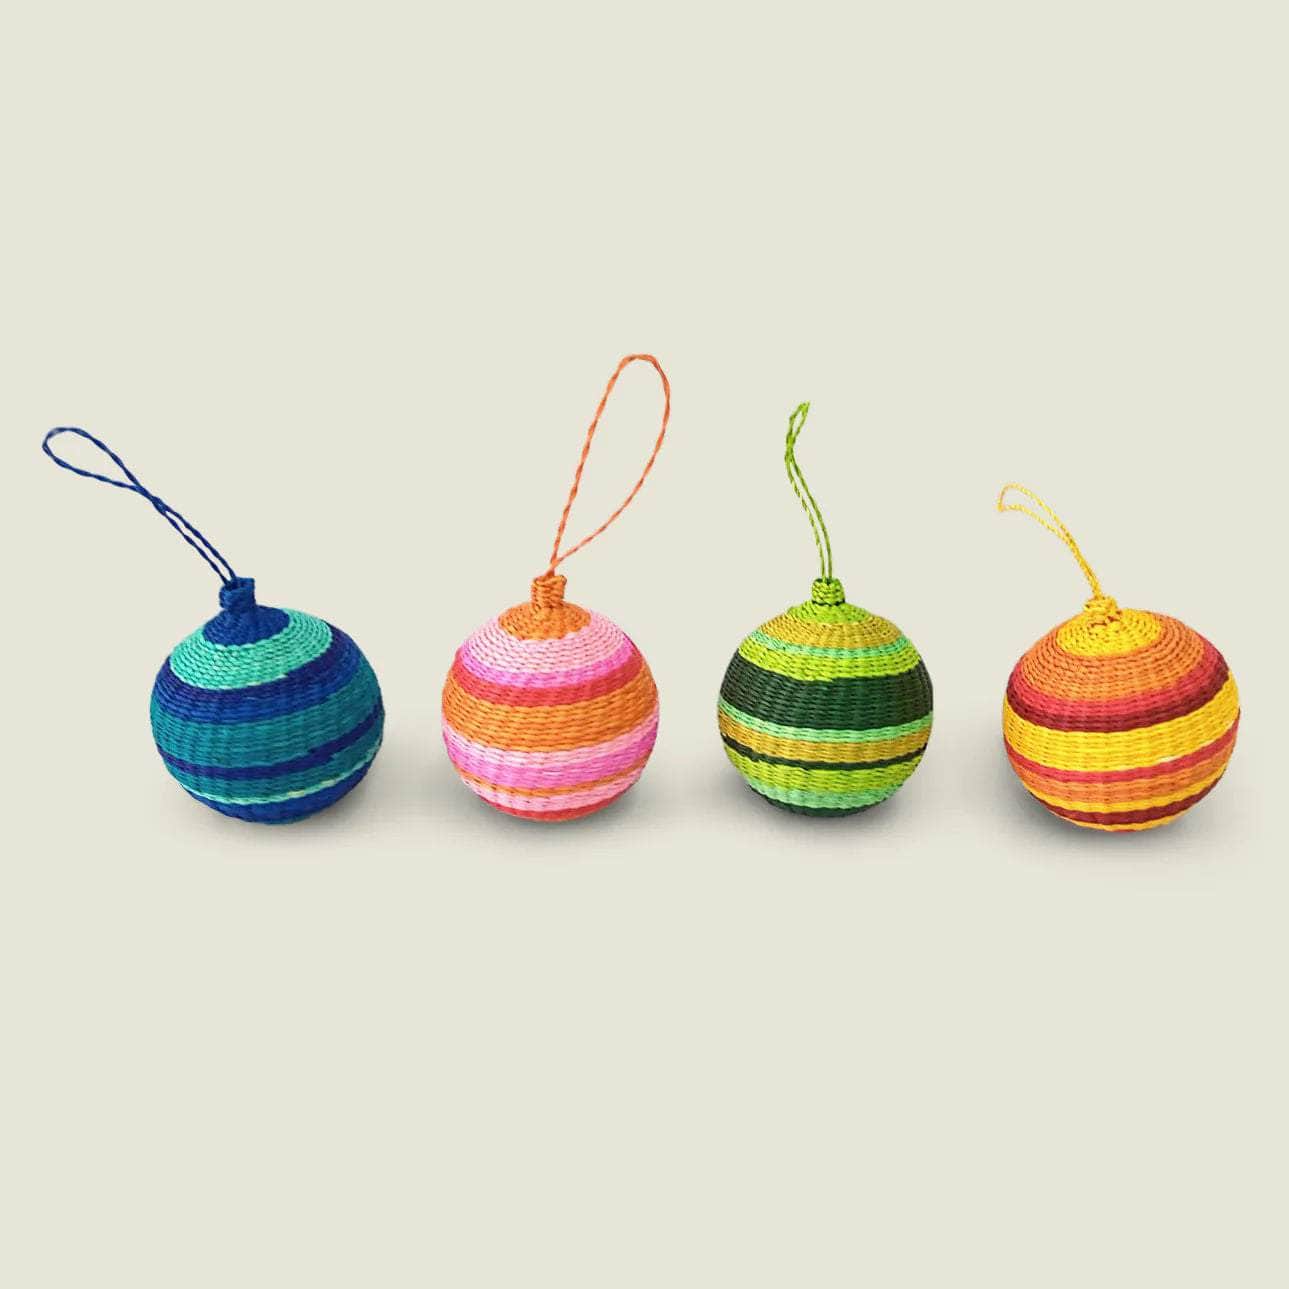 Palmito Woven Baubles (Set of 4)